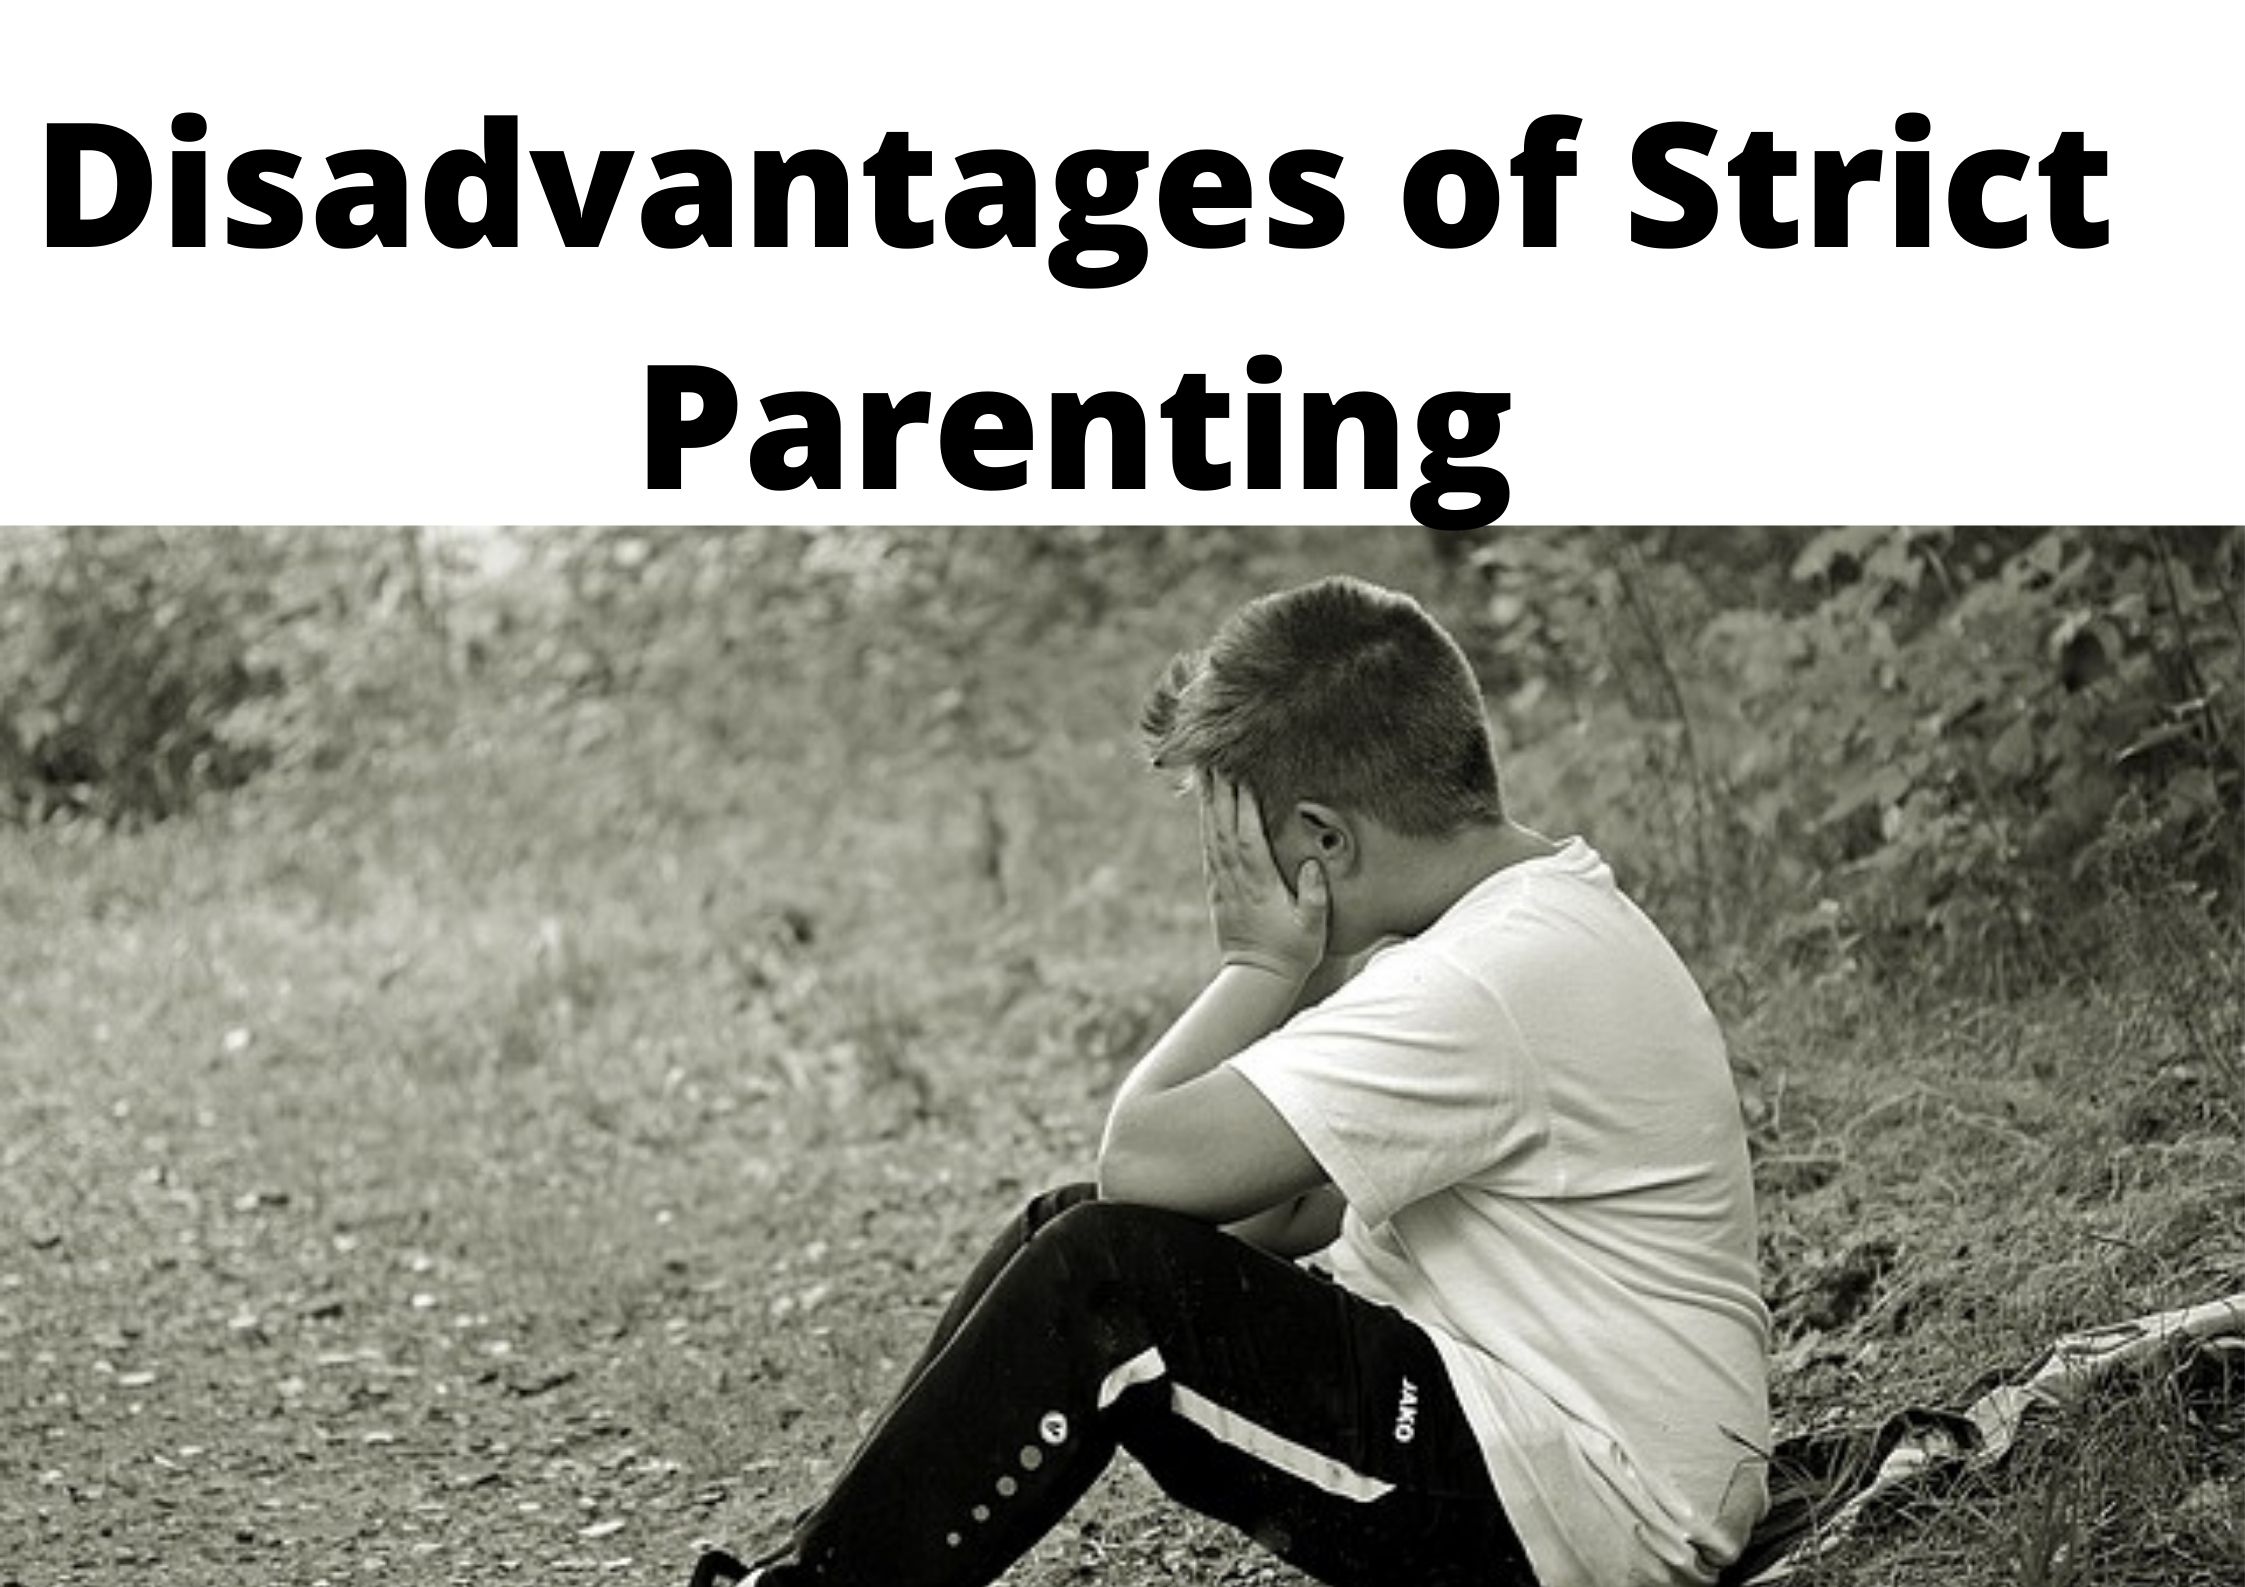 10 Disadvantages of Strict Parenting (Why to avoid it)